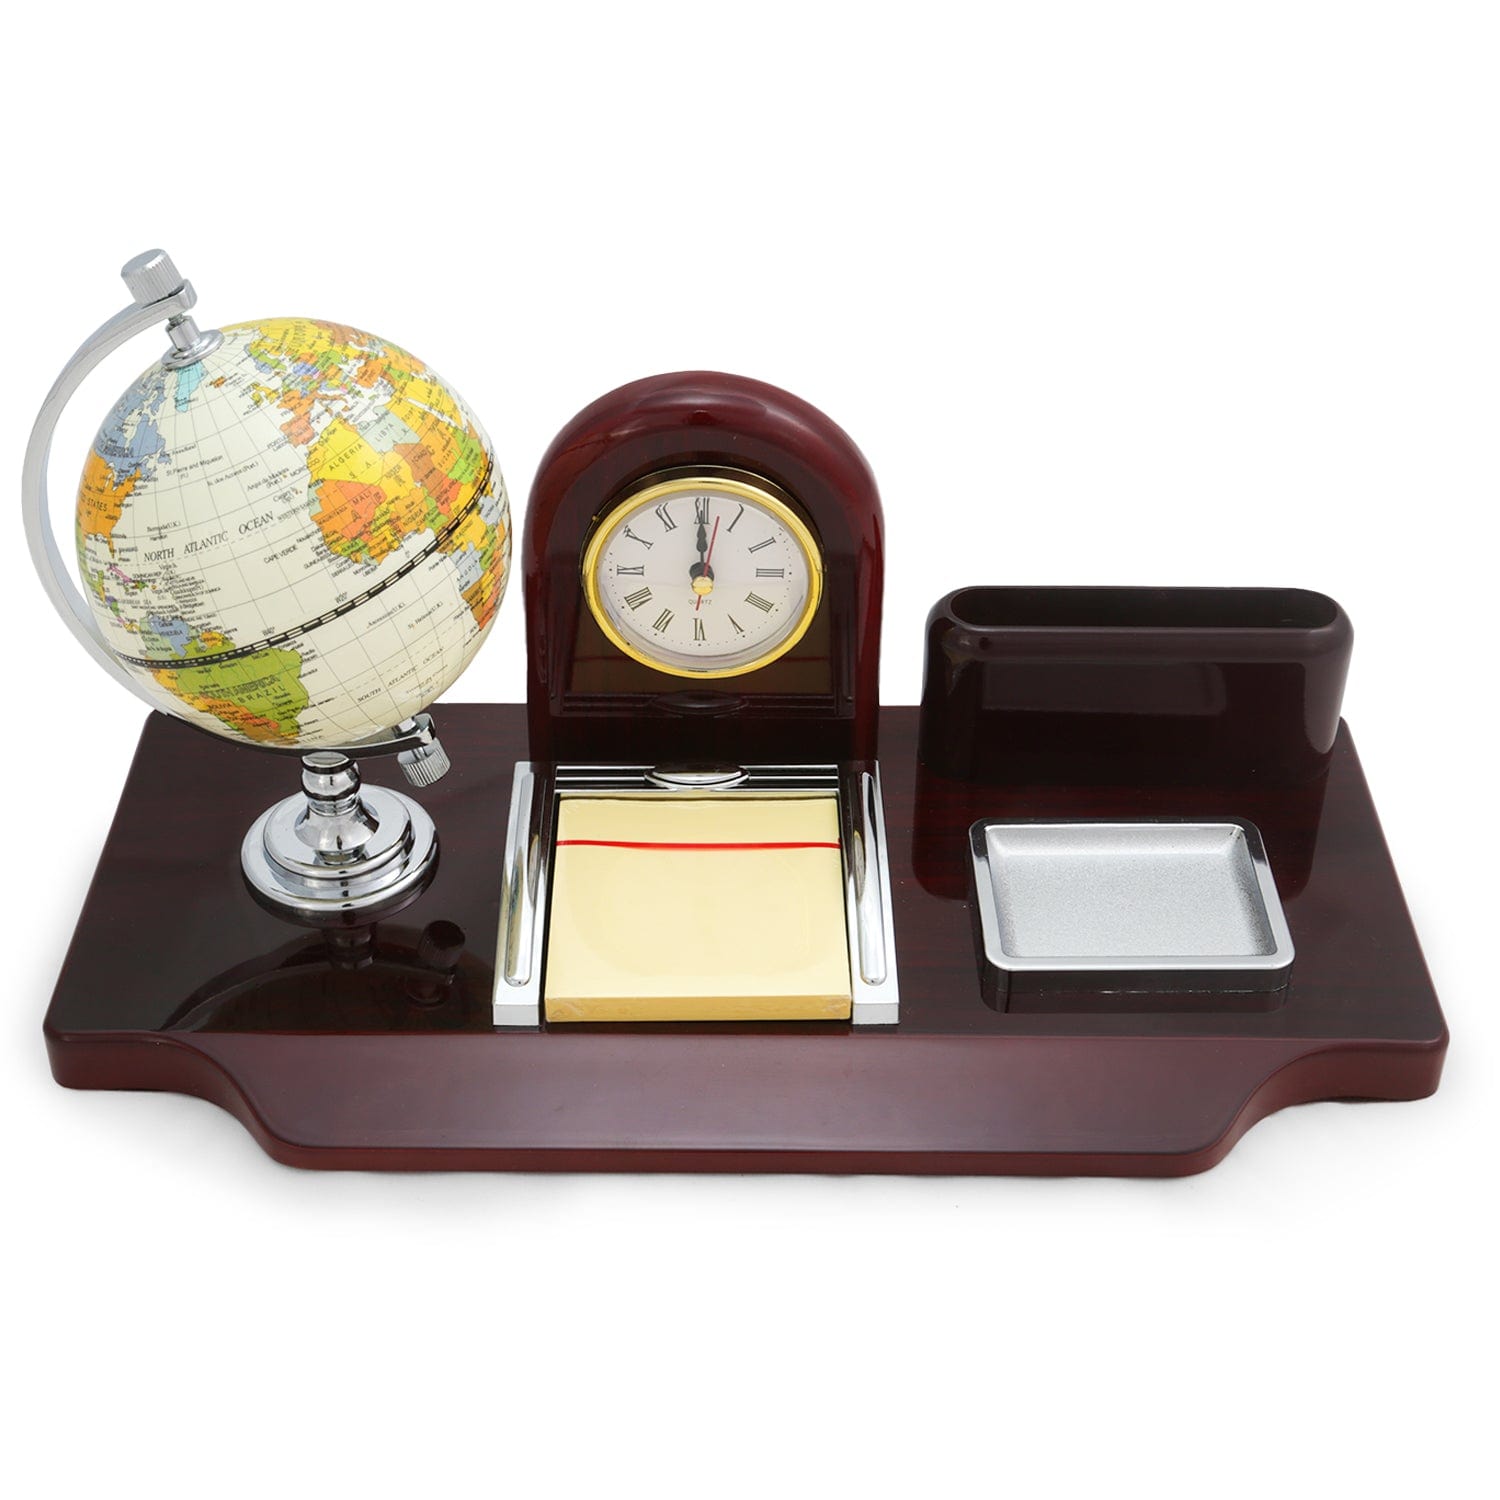 Red Butler office_decor Office Table Accessory OAOT00W14Y16A1 OTW14A1 Redbutler